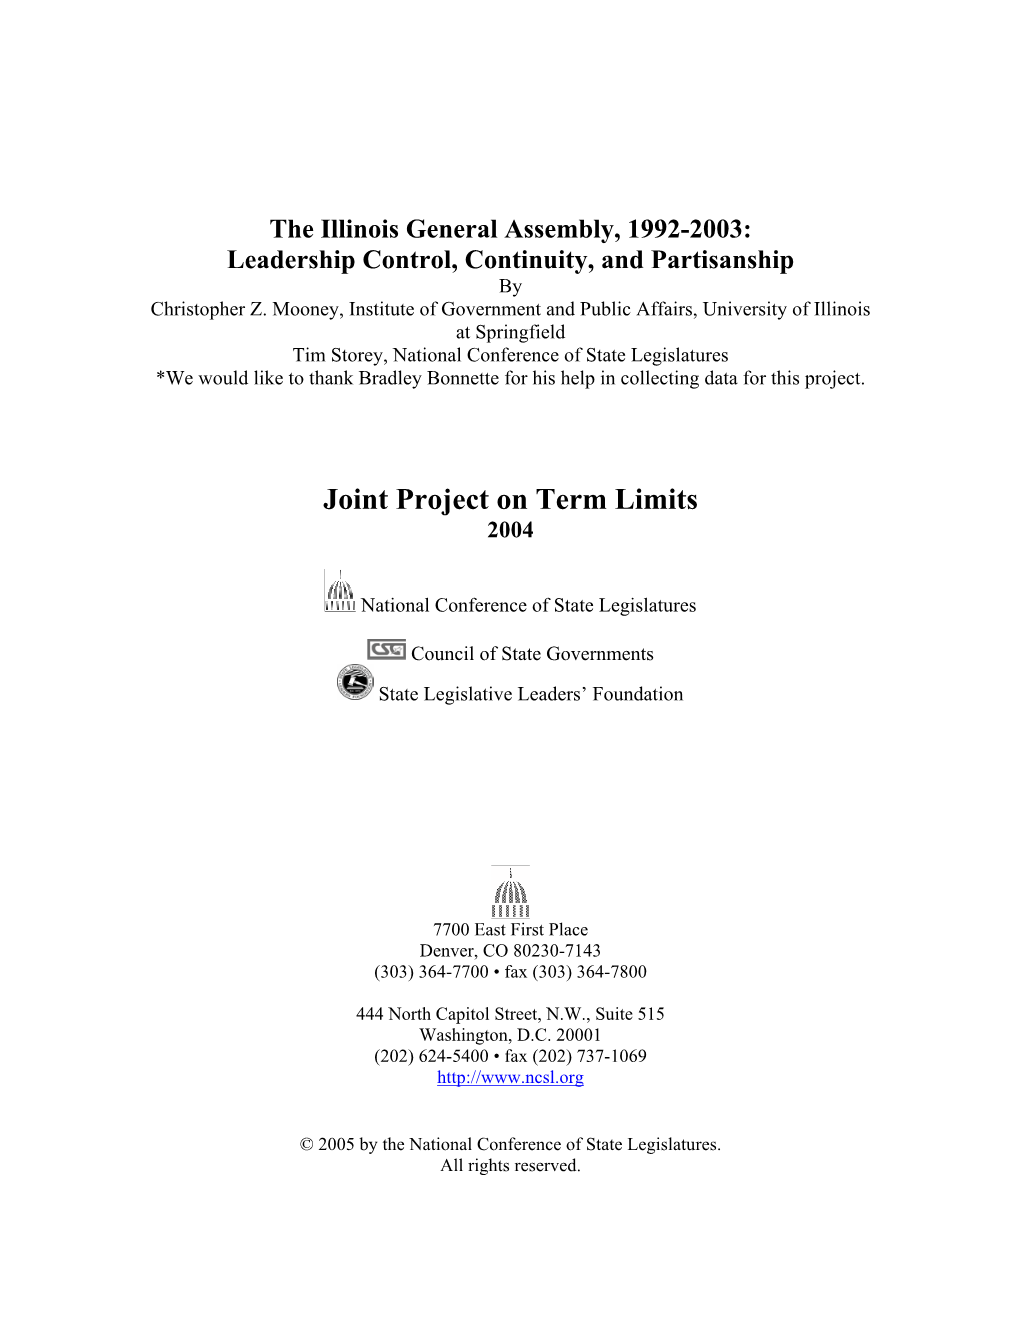 Illinois General Assembly, 1992-2003: Leadership Control, Continuity, and Partisanship by Christopher Z